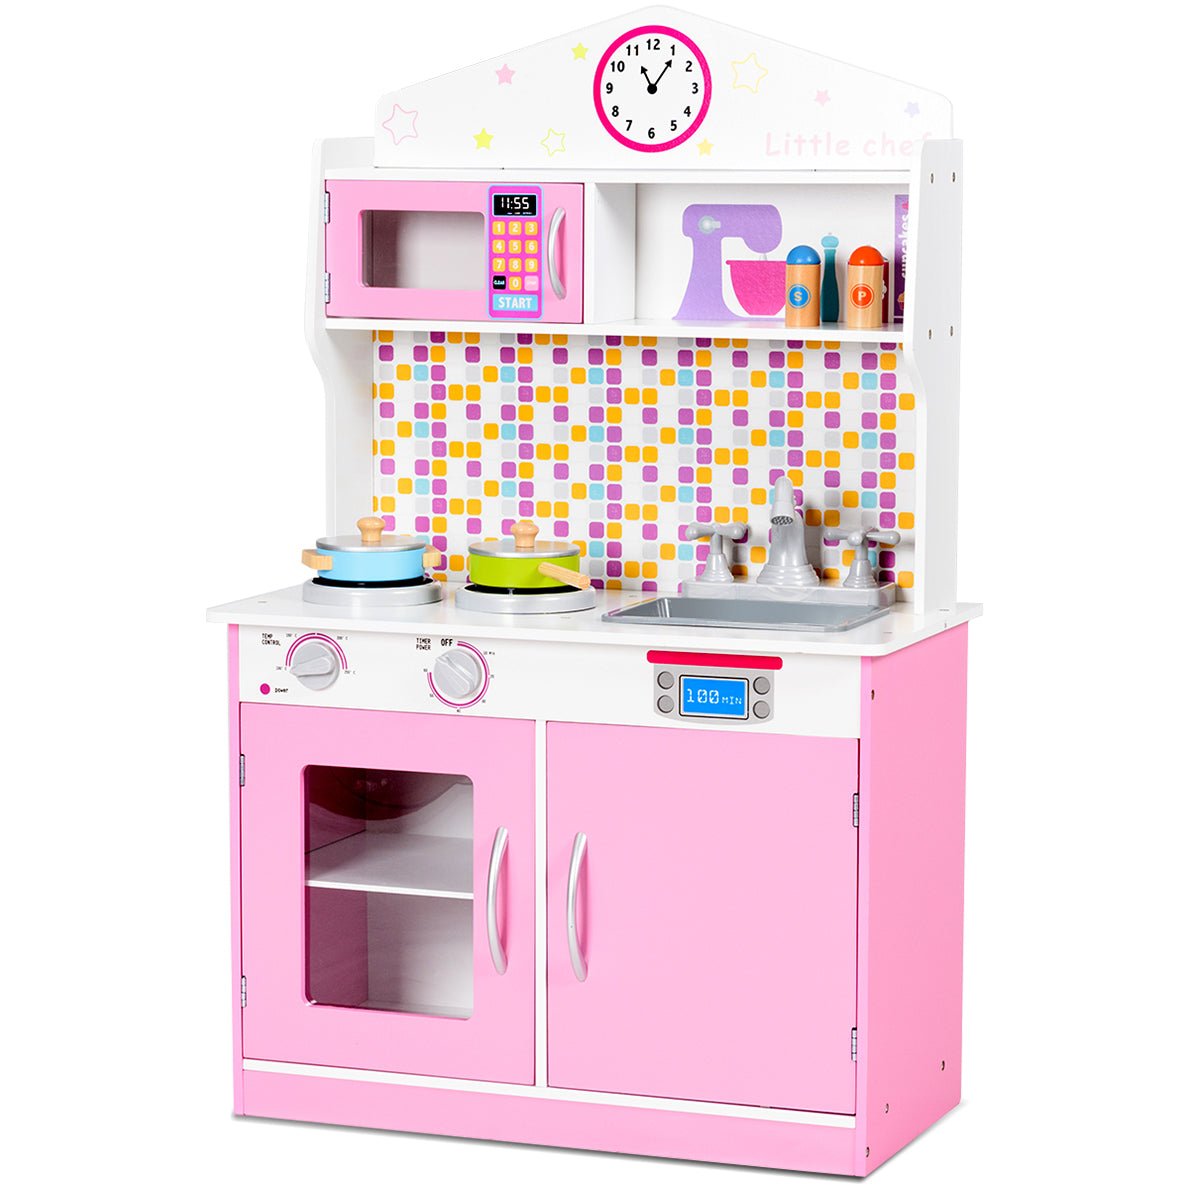 Wooden Toy Kitchen Playset - Pink Microwave Included